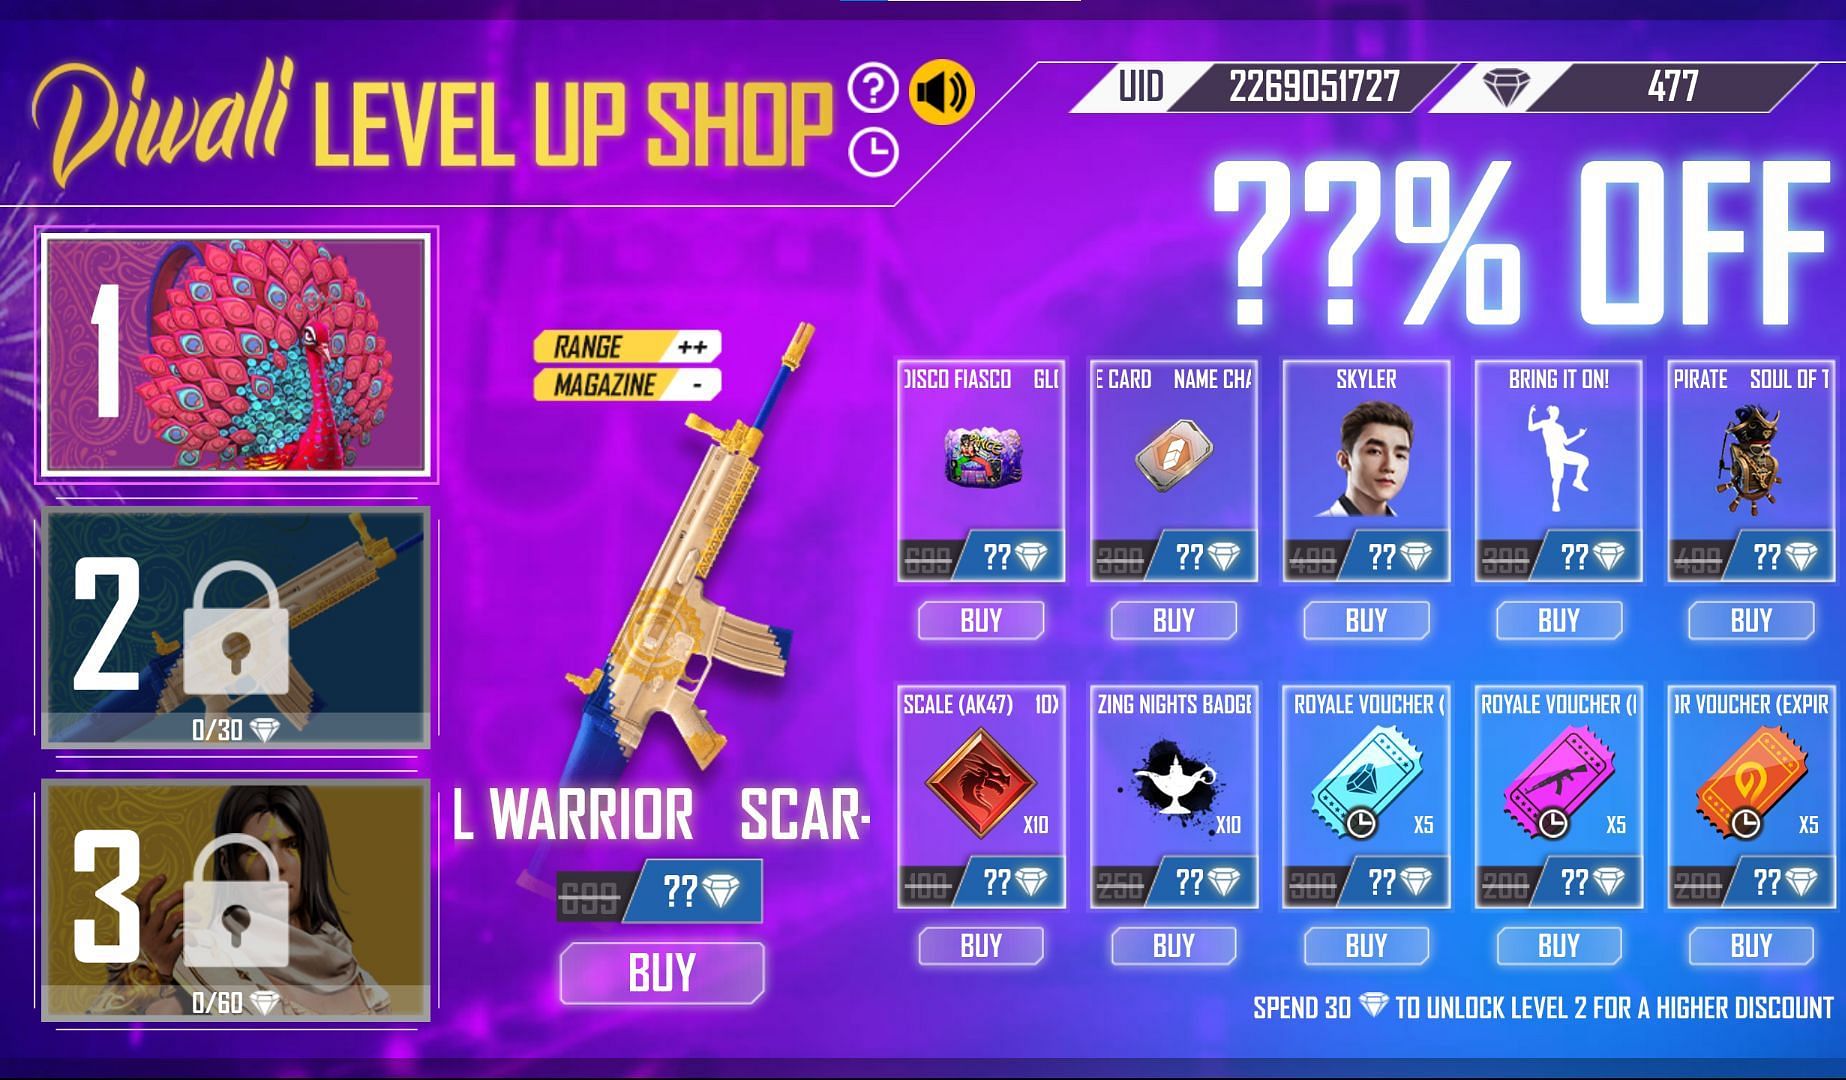 Users can get a name change card from level 2 of the Diwali Level Up Shop (Image via Free Fire)